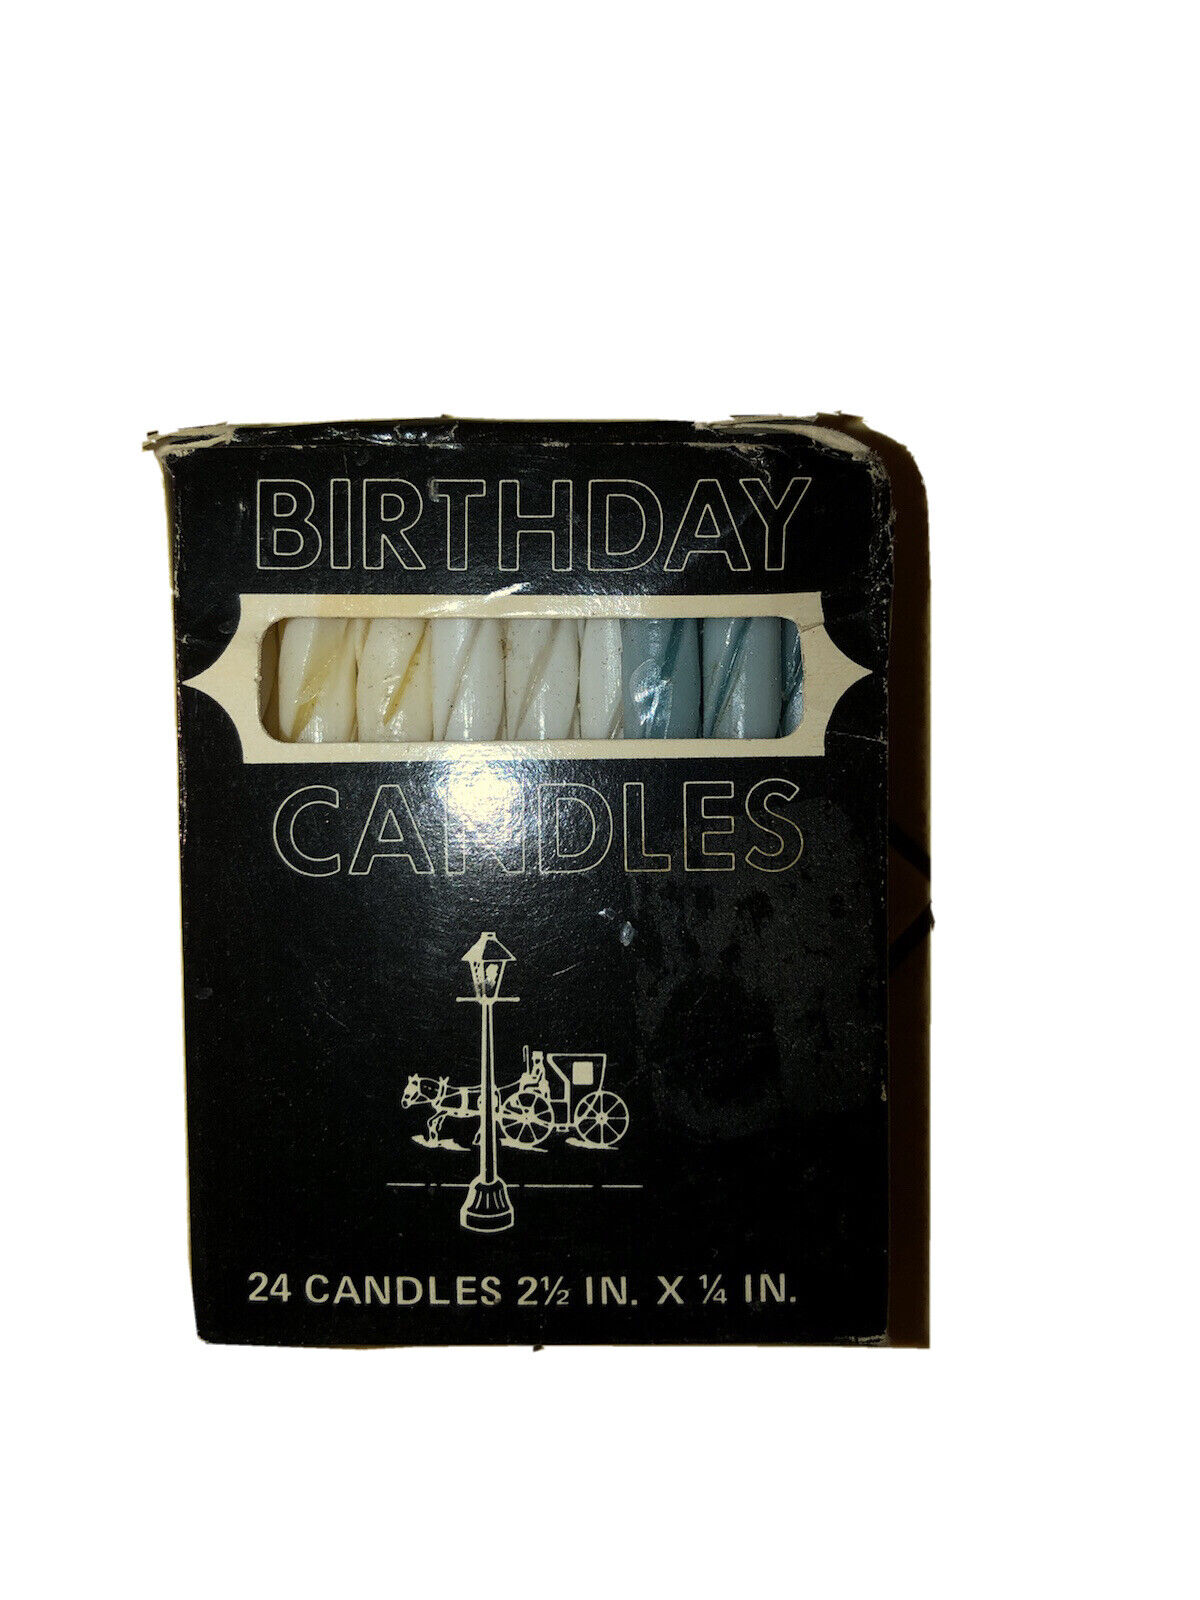 1970’s General Wax And Candle Co. Birthday Candles (most Inside) Pack